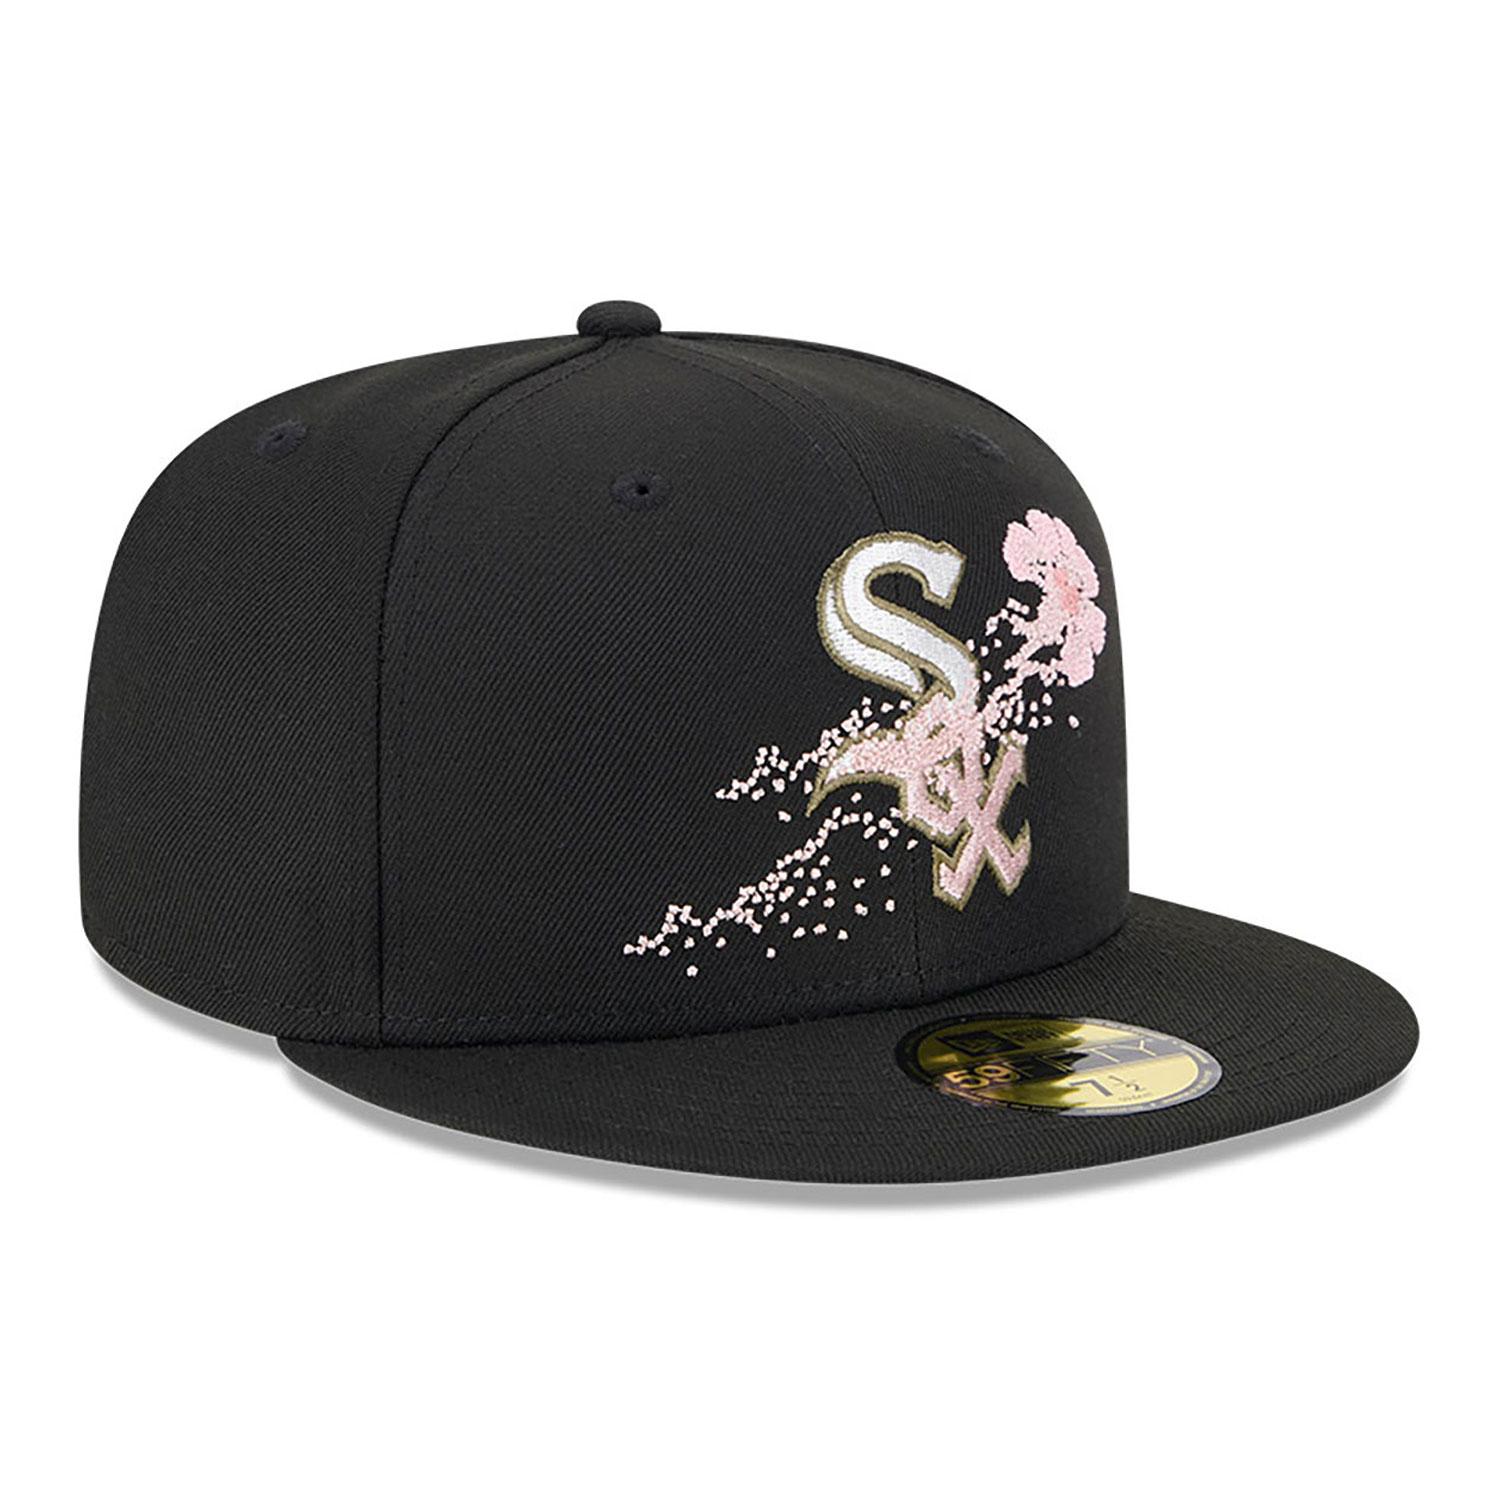 Dotted Floral Chicago White Sox 59FIFTY Fitted Cap | New Era Cap AD